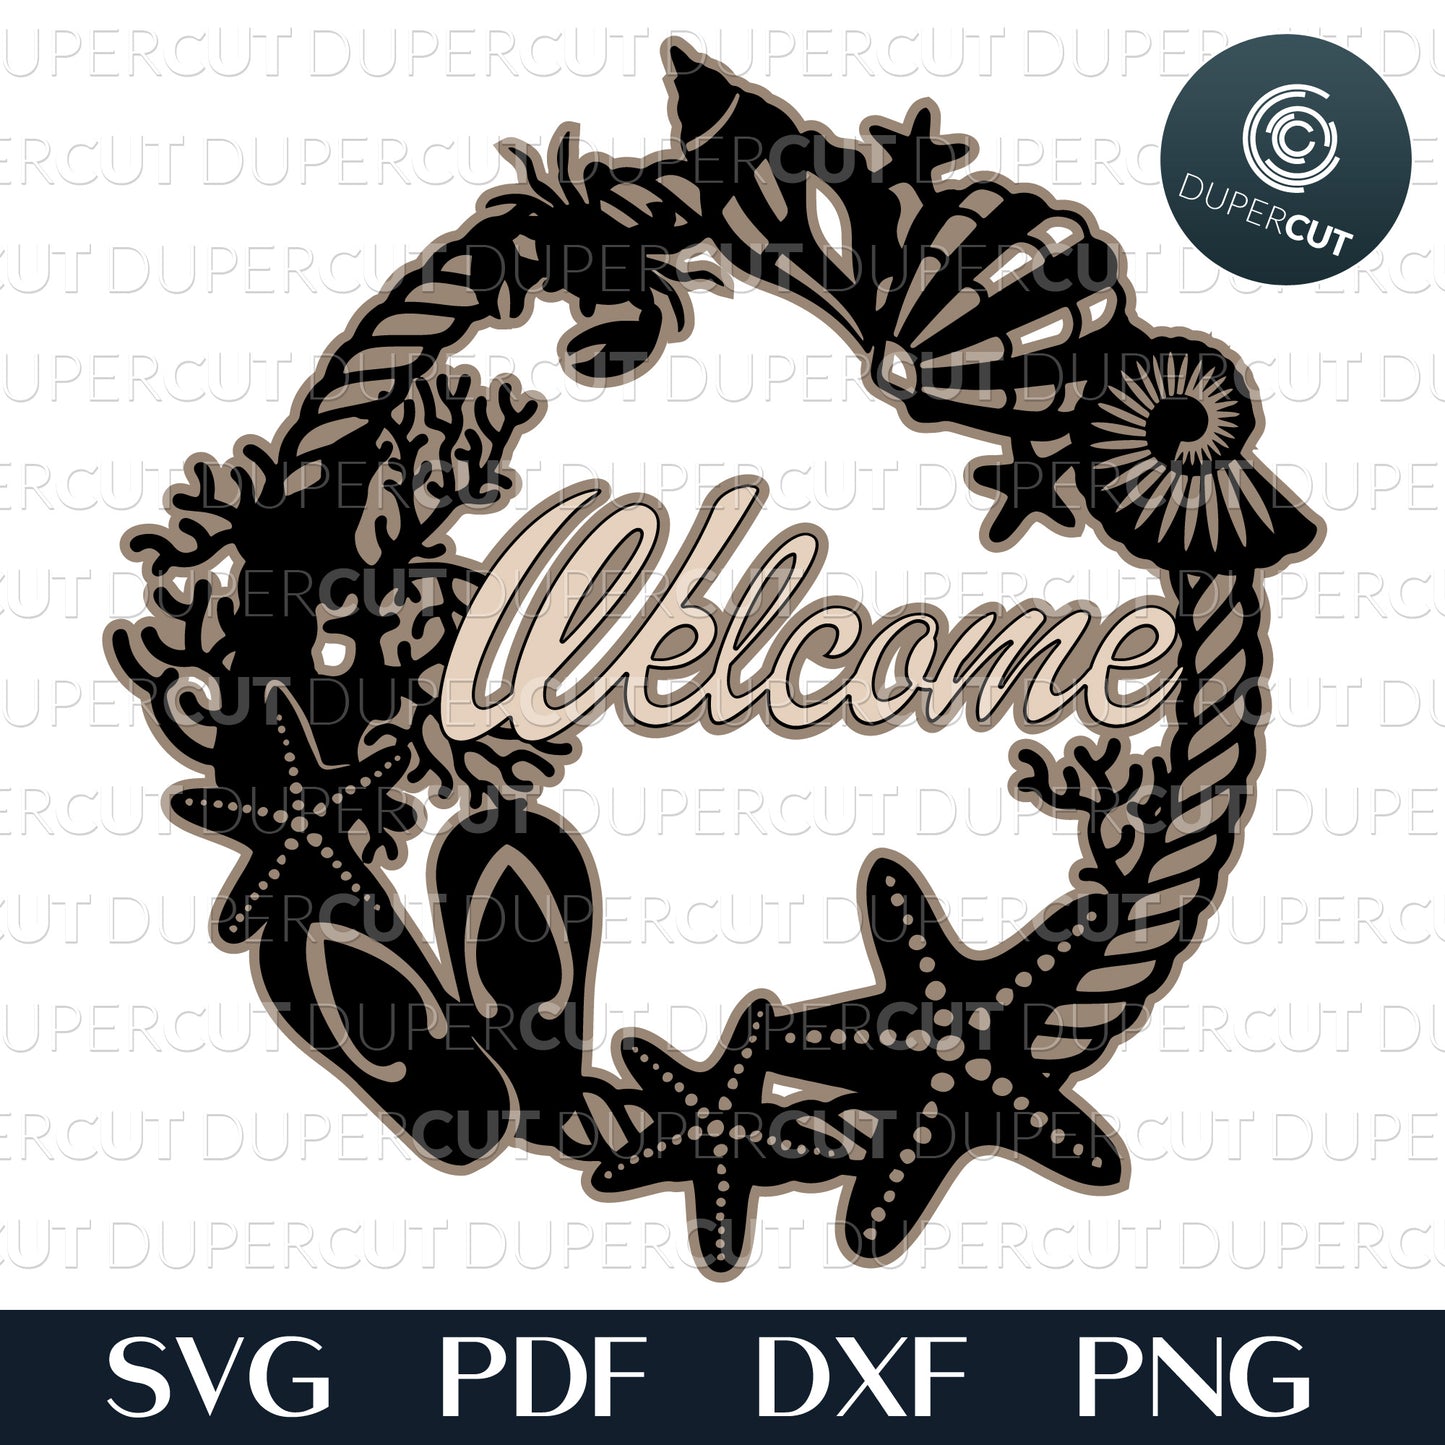 Seashells welcome wreath, cabin decoration. Layered laser files.  SVG JPEG DXF files. Template for paper cutting, laser cutting. For use with Cricut, Glowforge, Silhouette Cameo, CNC machines. Personal or commercial license.